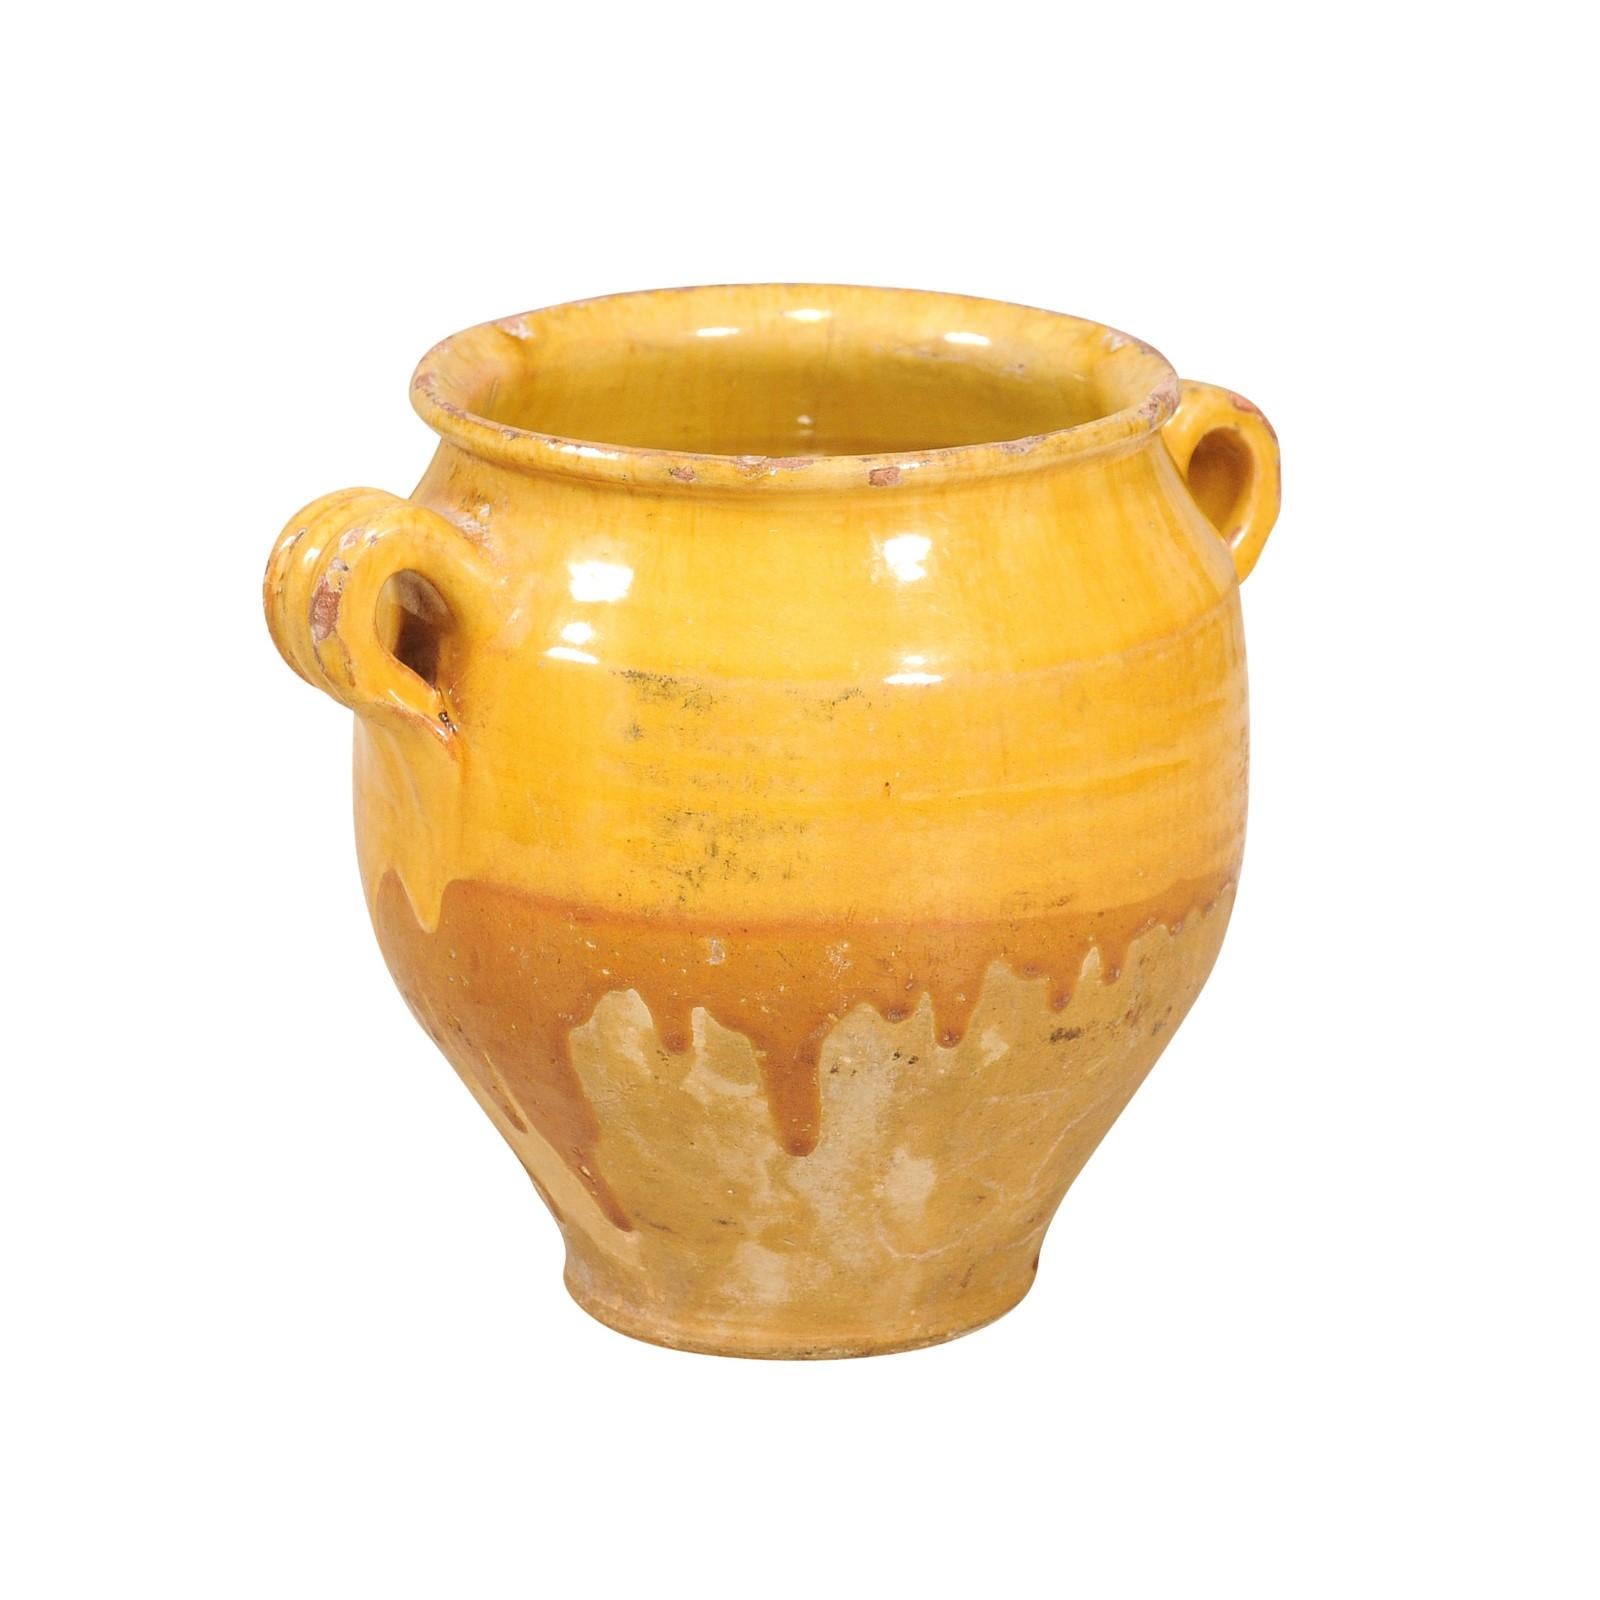 A French Provincial double handled pot à confit from the 20th century with yellow glaze and nice rustic character. This French Provincial pot à confit, with its inviting yellow glaze, is a delightful representation of 20th-century rustic charm. The